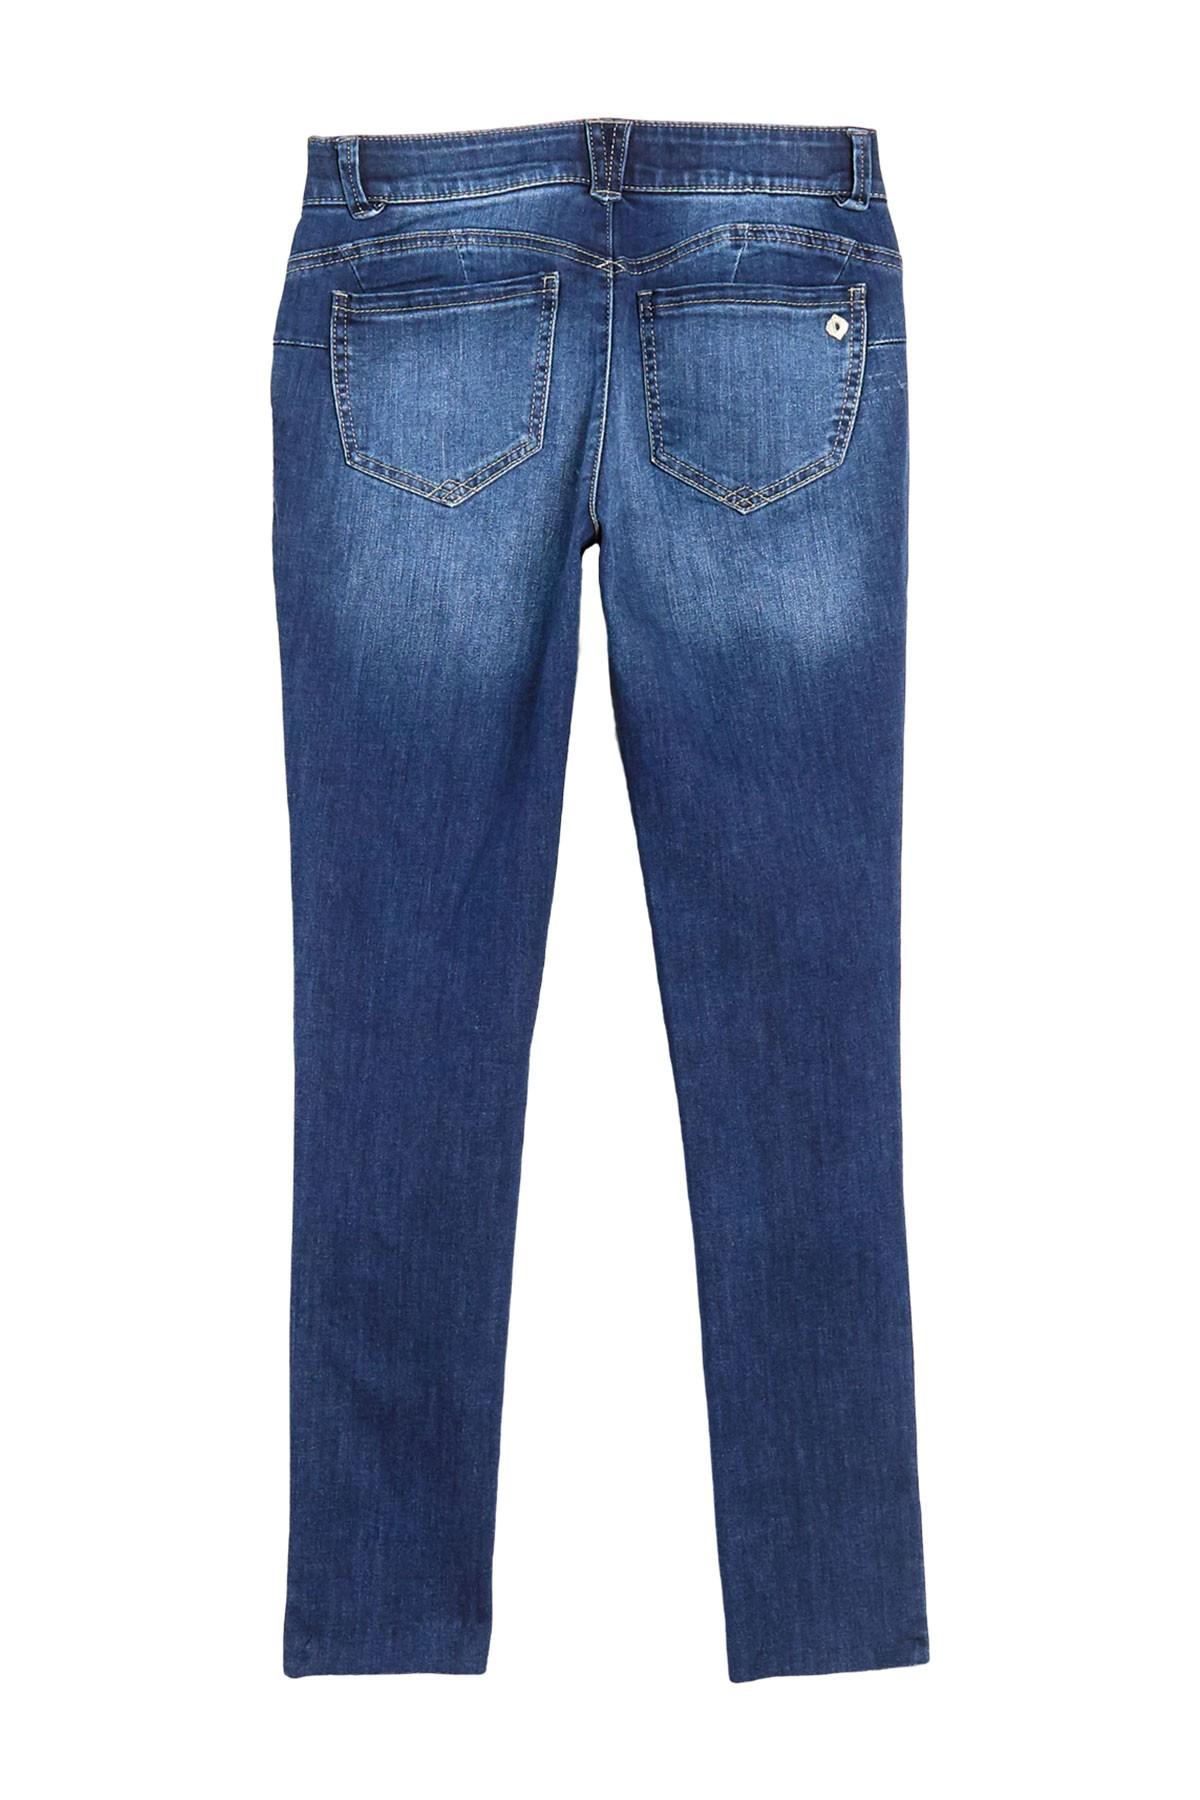 Democracy Denim Absolution Ankle Length Jeans in Blue - Lyst